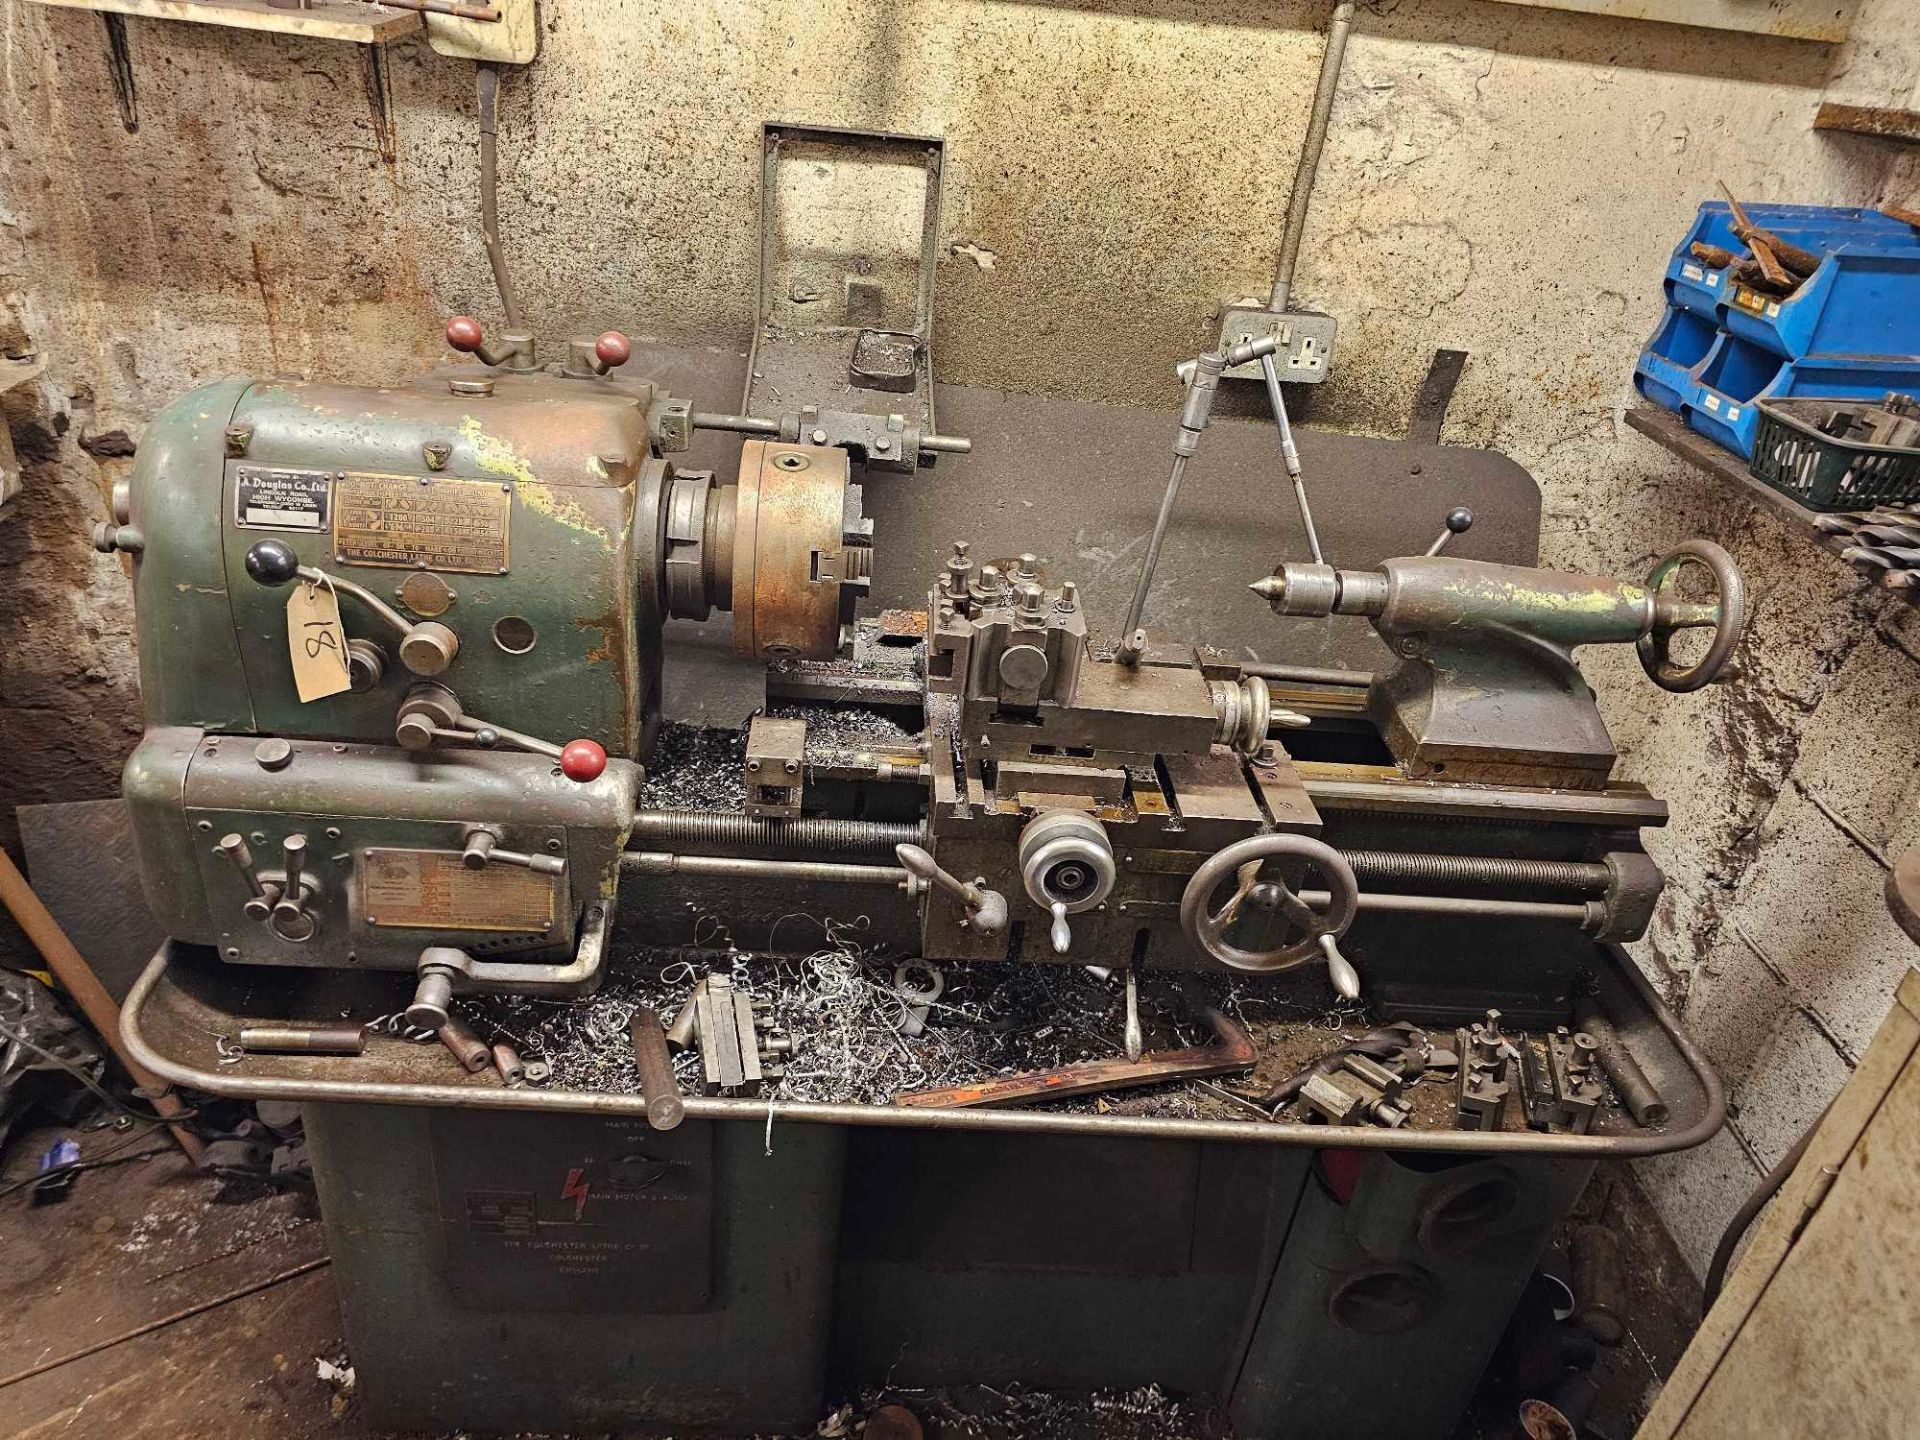 Colchester Lathe 50 Cycle 2 Phase 3.0HP Complete With A Wide Range Of Tooling - Image 2 of 7